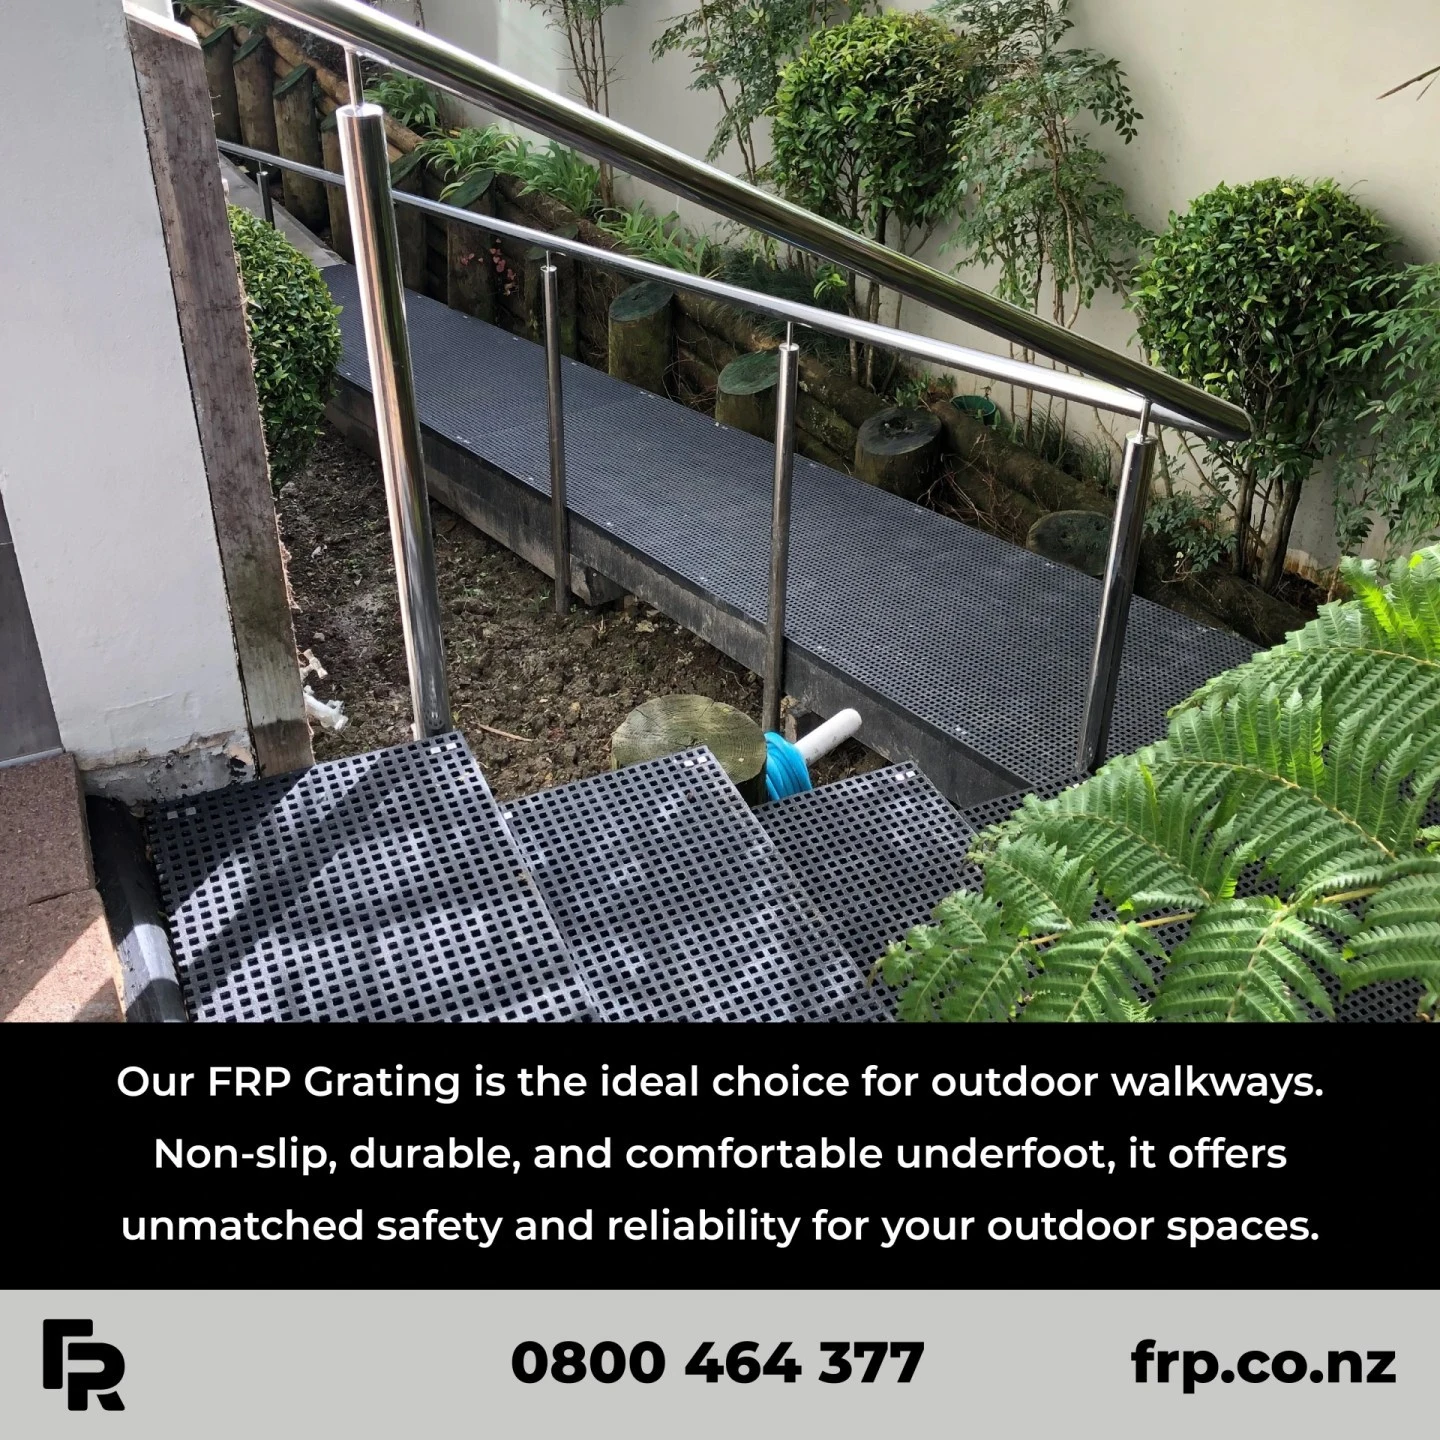 Enquire today!

#frp #frpproducts #residential #diyprojects #stairways #walkways #landscaping #nzarchitects #nzconstruction